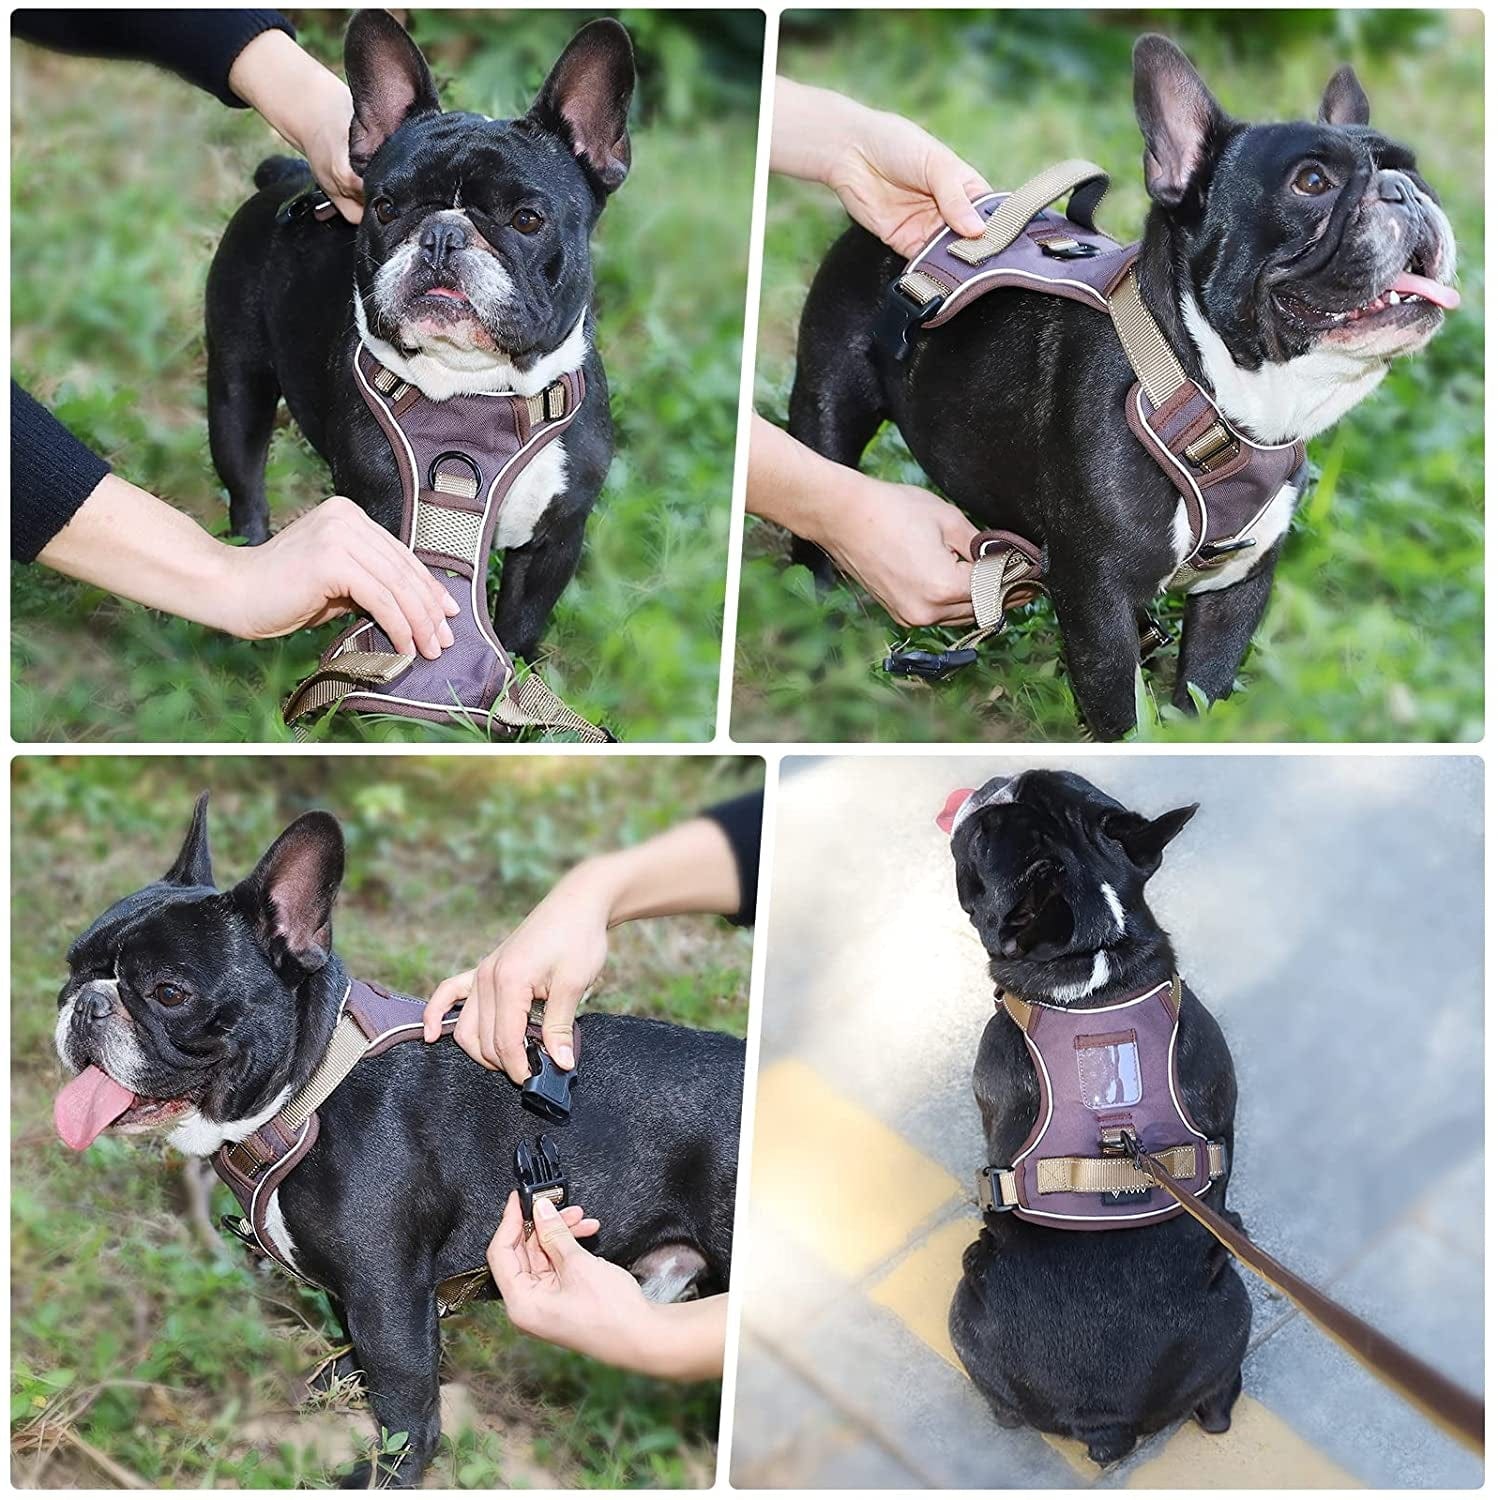 French bulldog harness and winter coat - control and comfort with